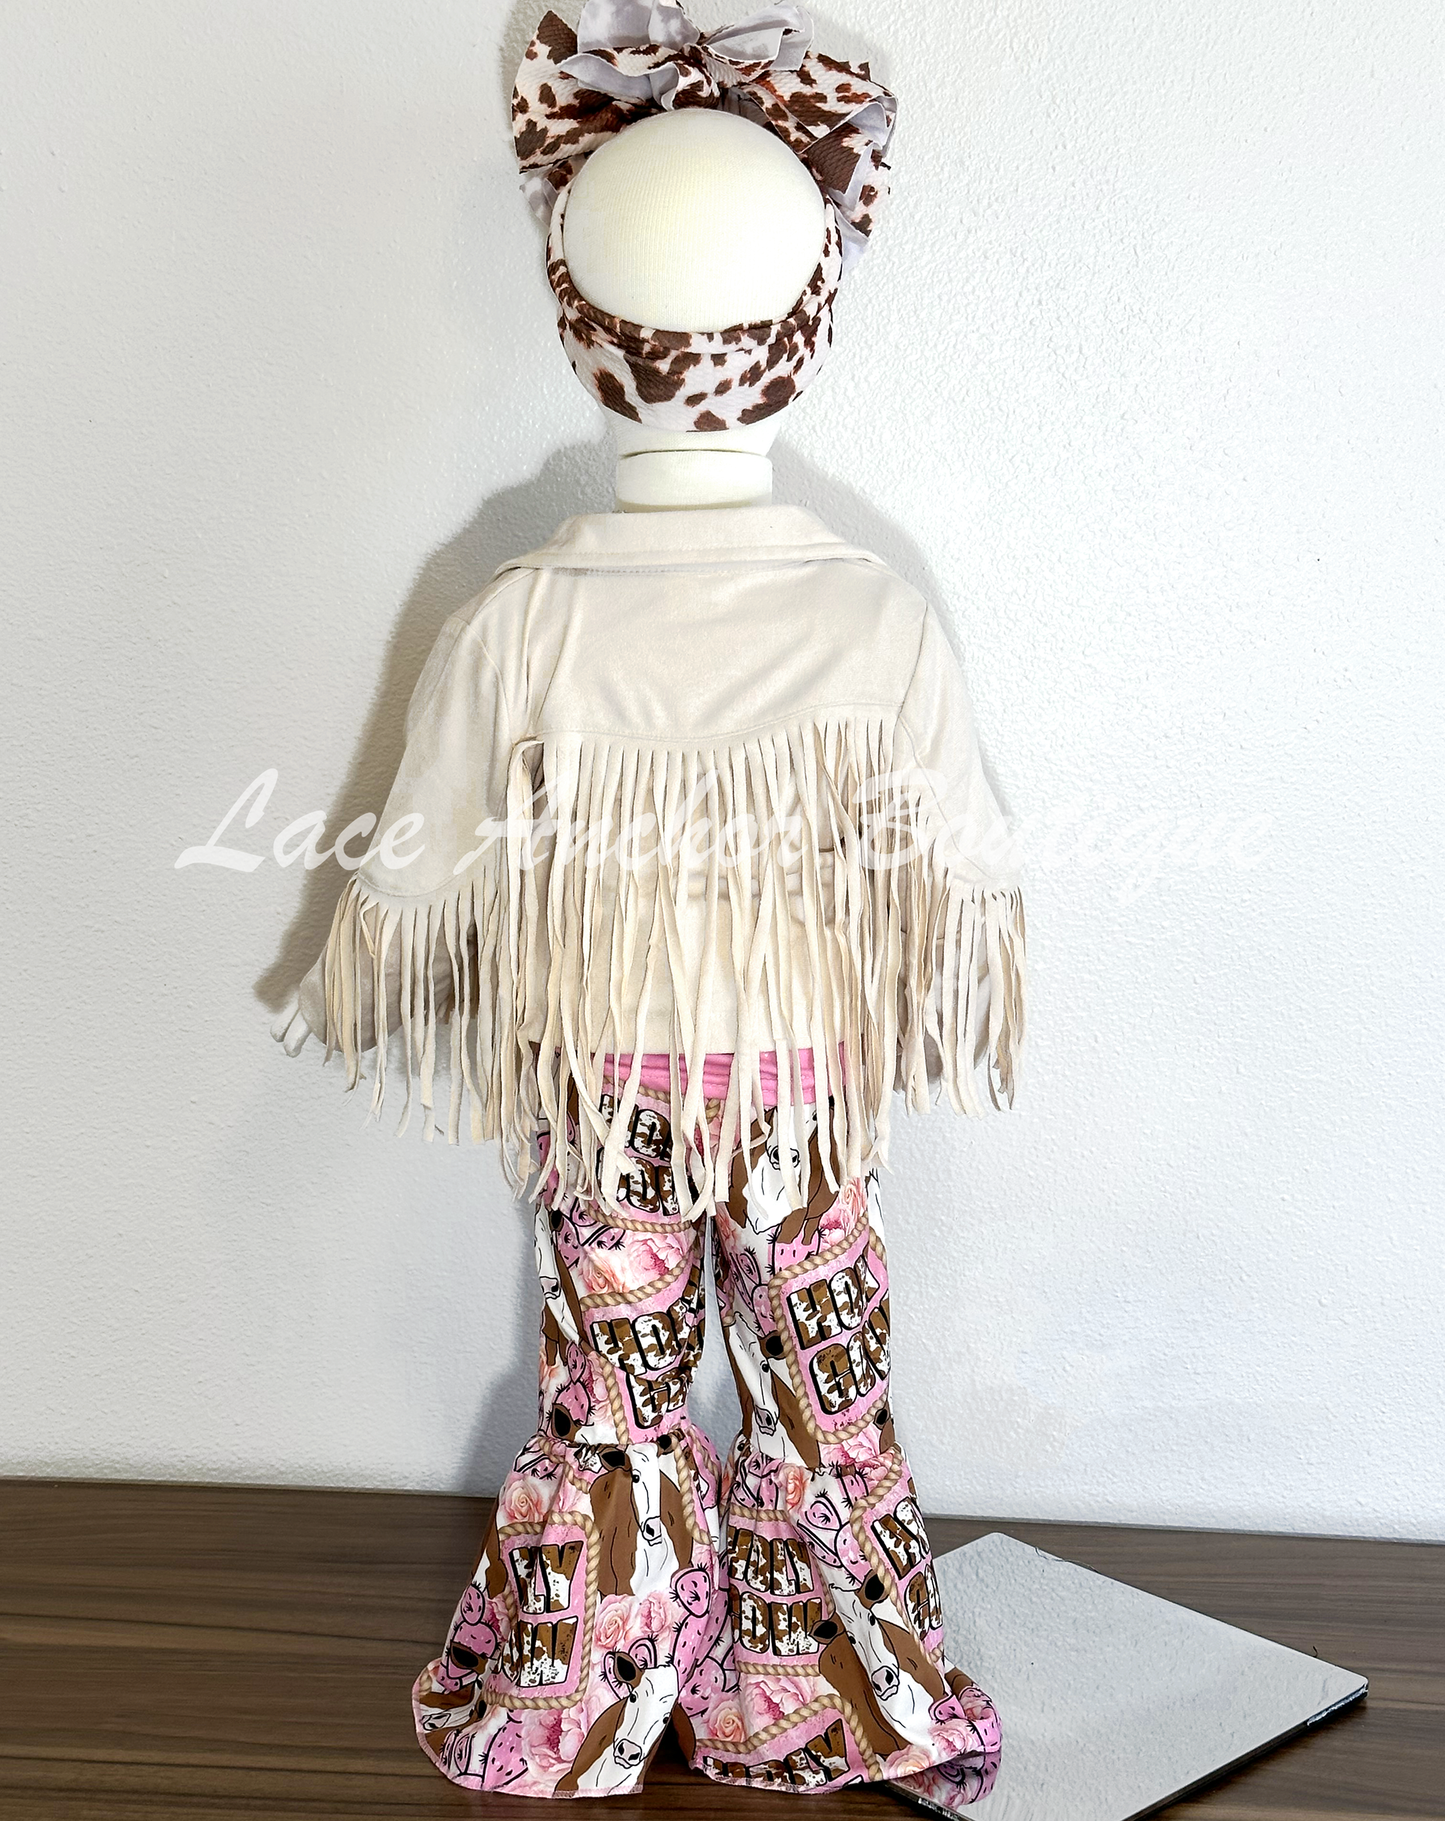 Toddler baby girls faux suede western jacket with fringe all over. Girl jacket in ivory /cream color.